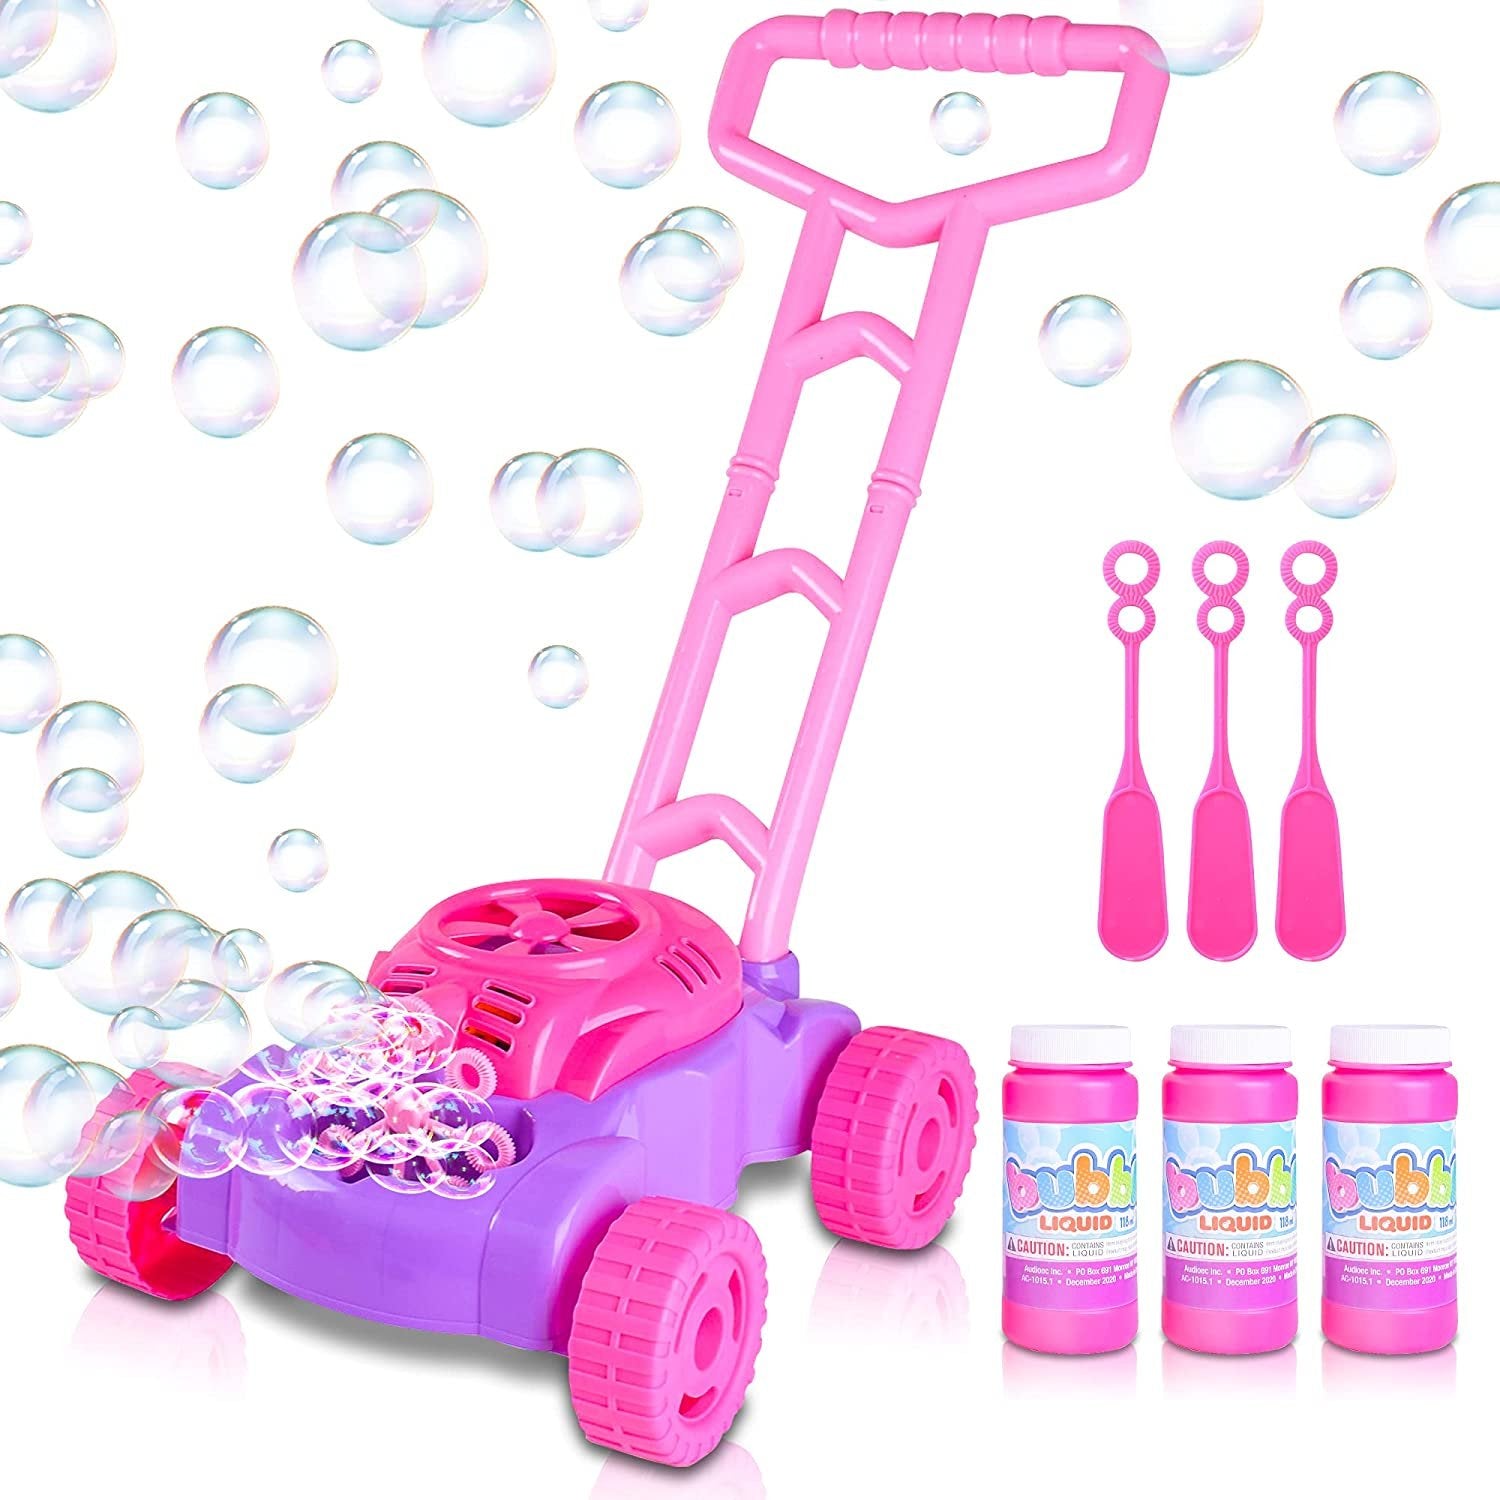 Bubble Mower For Toddlers Electronic Bubble Blower Machine